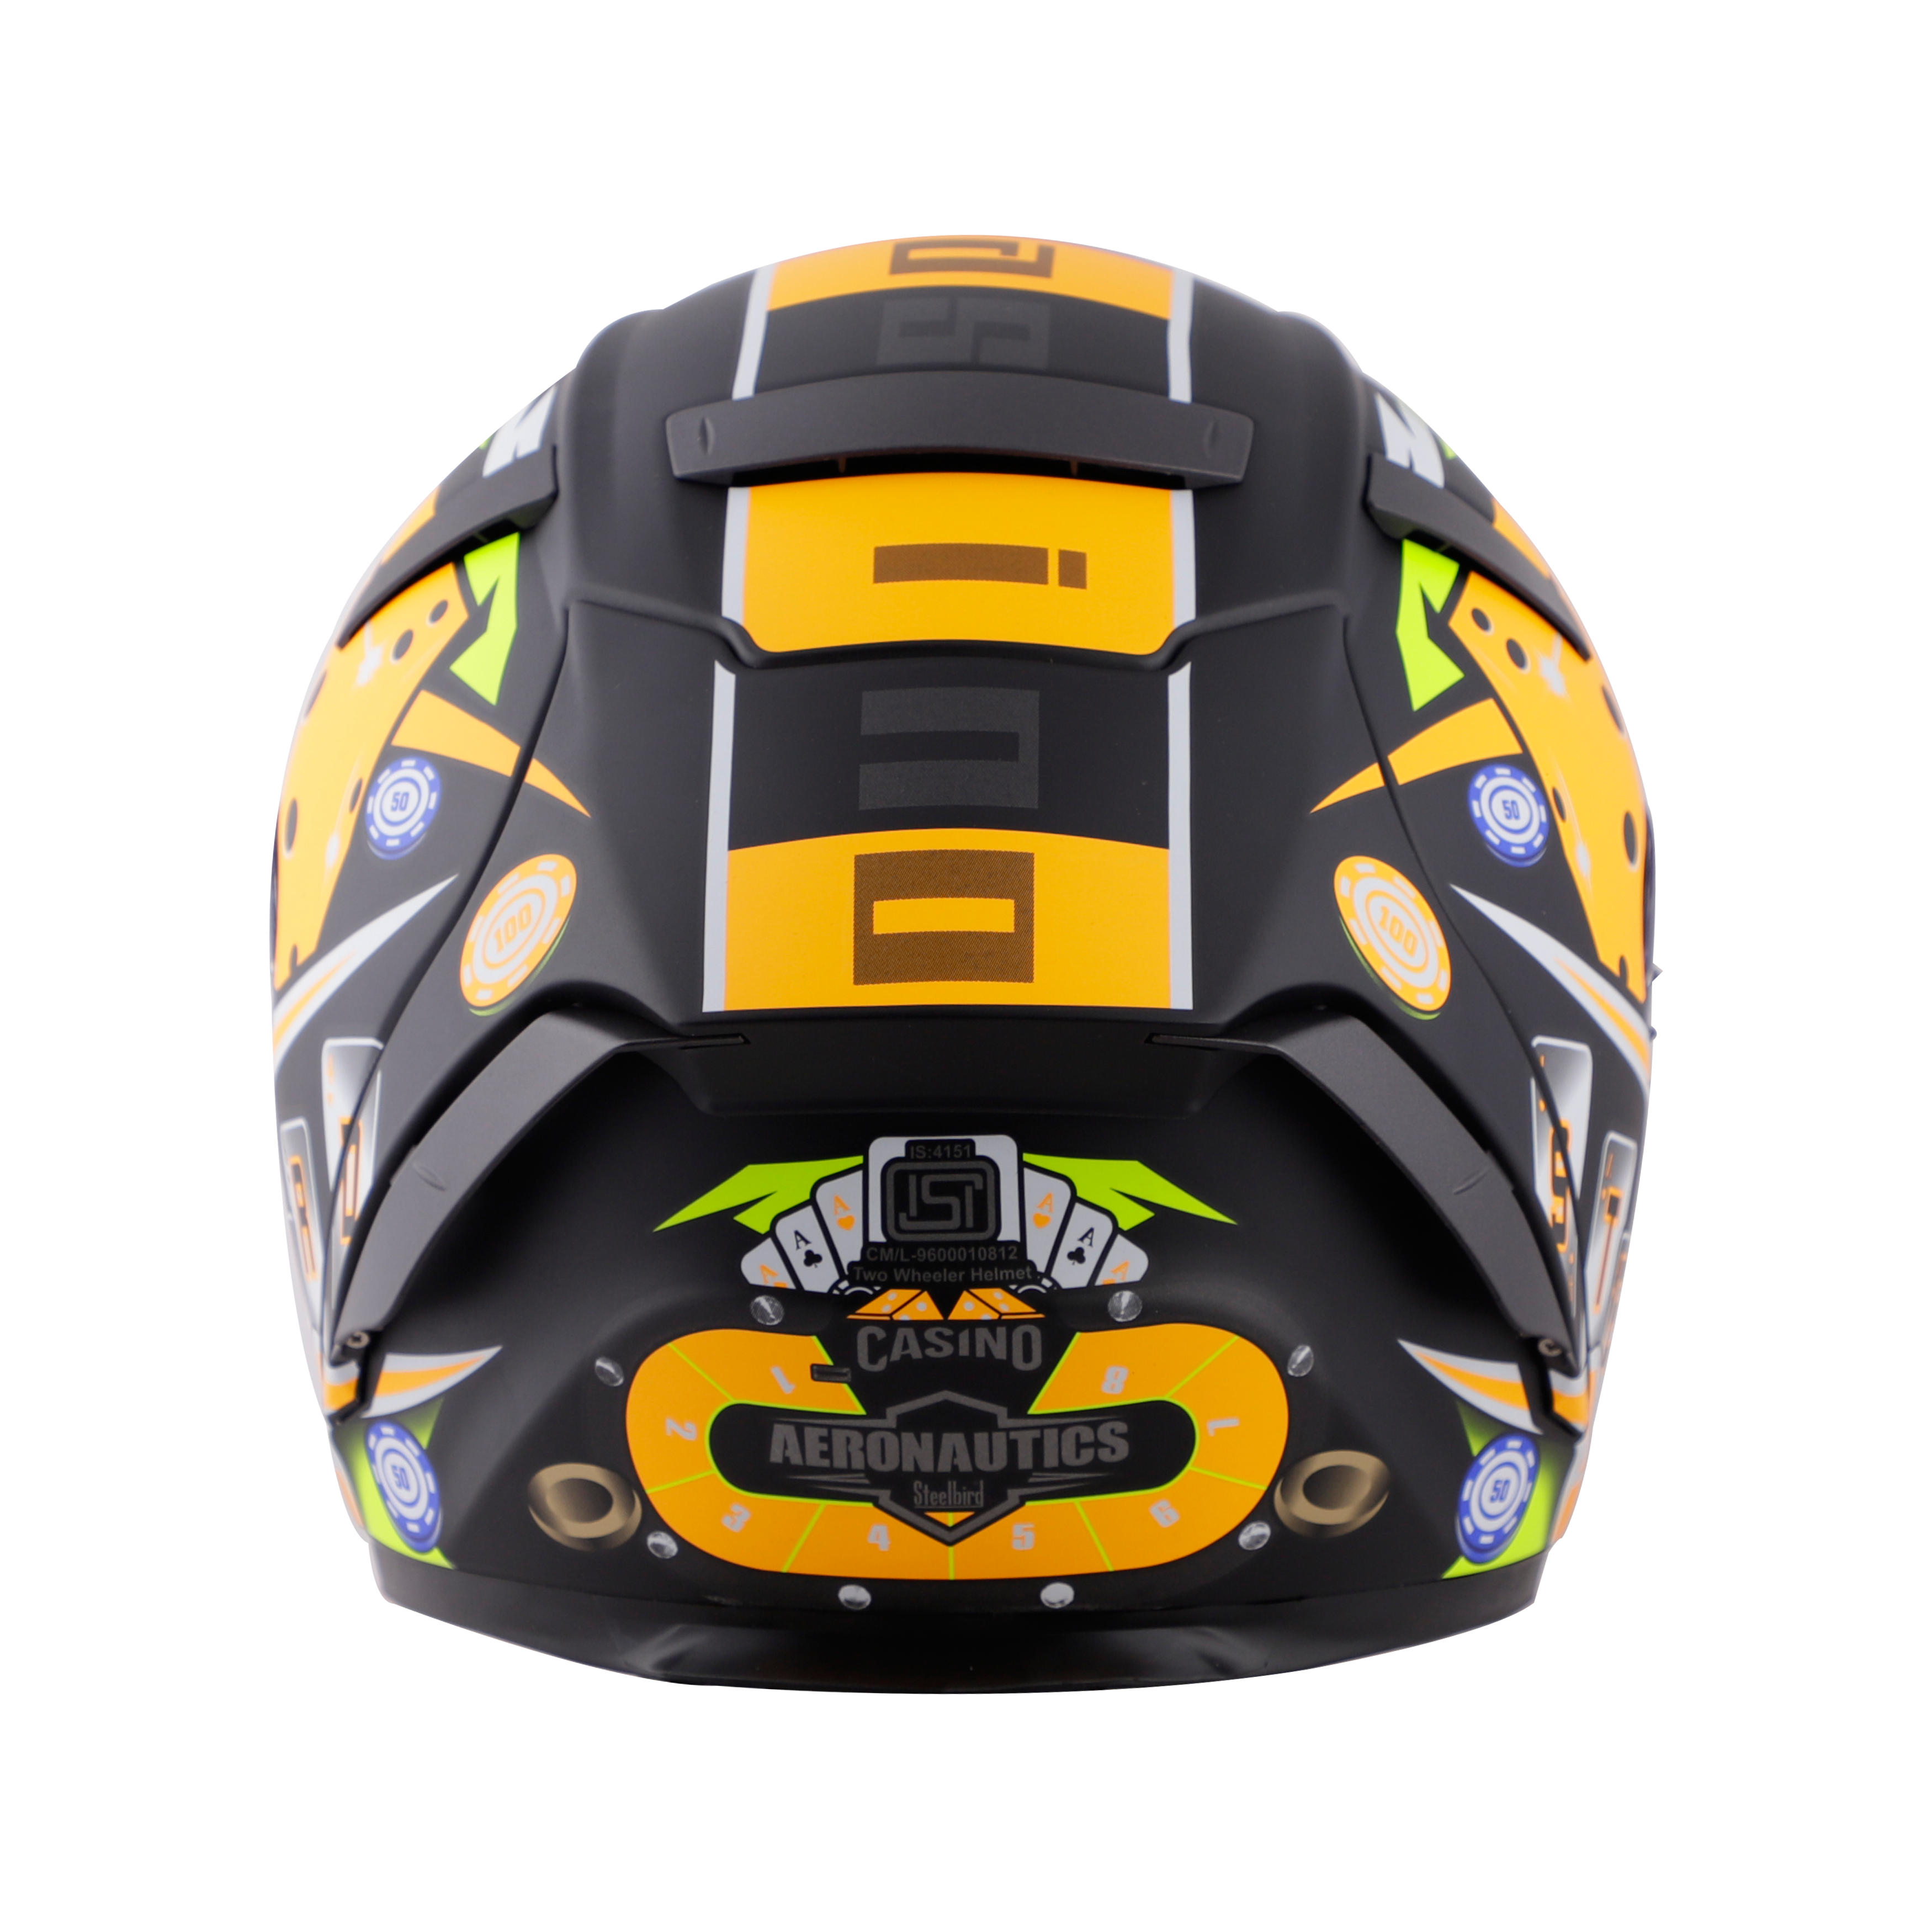 SA-2 CASINO GOLSSY BLACK WITH ORANGE ( FITTED WITH CLEAR VISOR EXTRA GOLD CHROME VISOR FREE WITH ANTI-FOG SHIELD HOLDER)